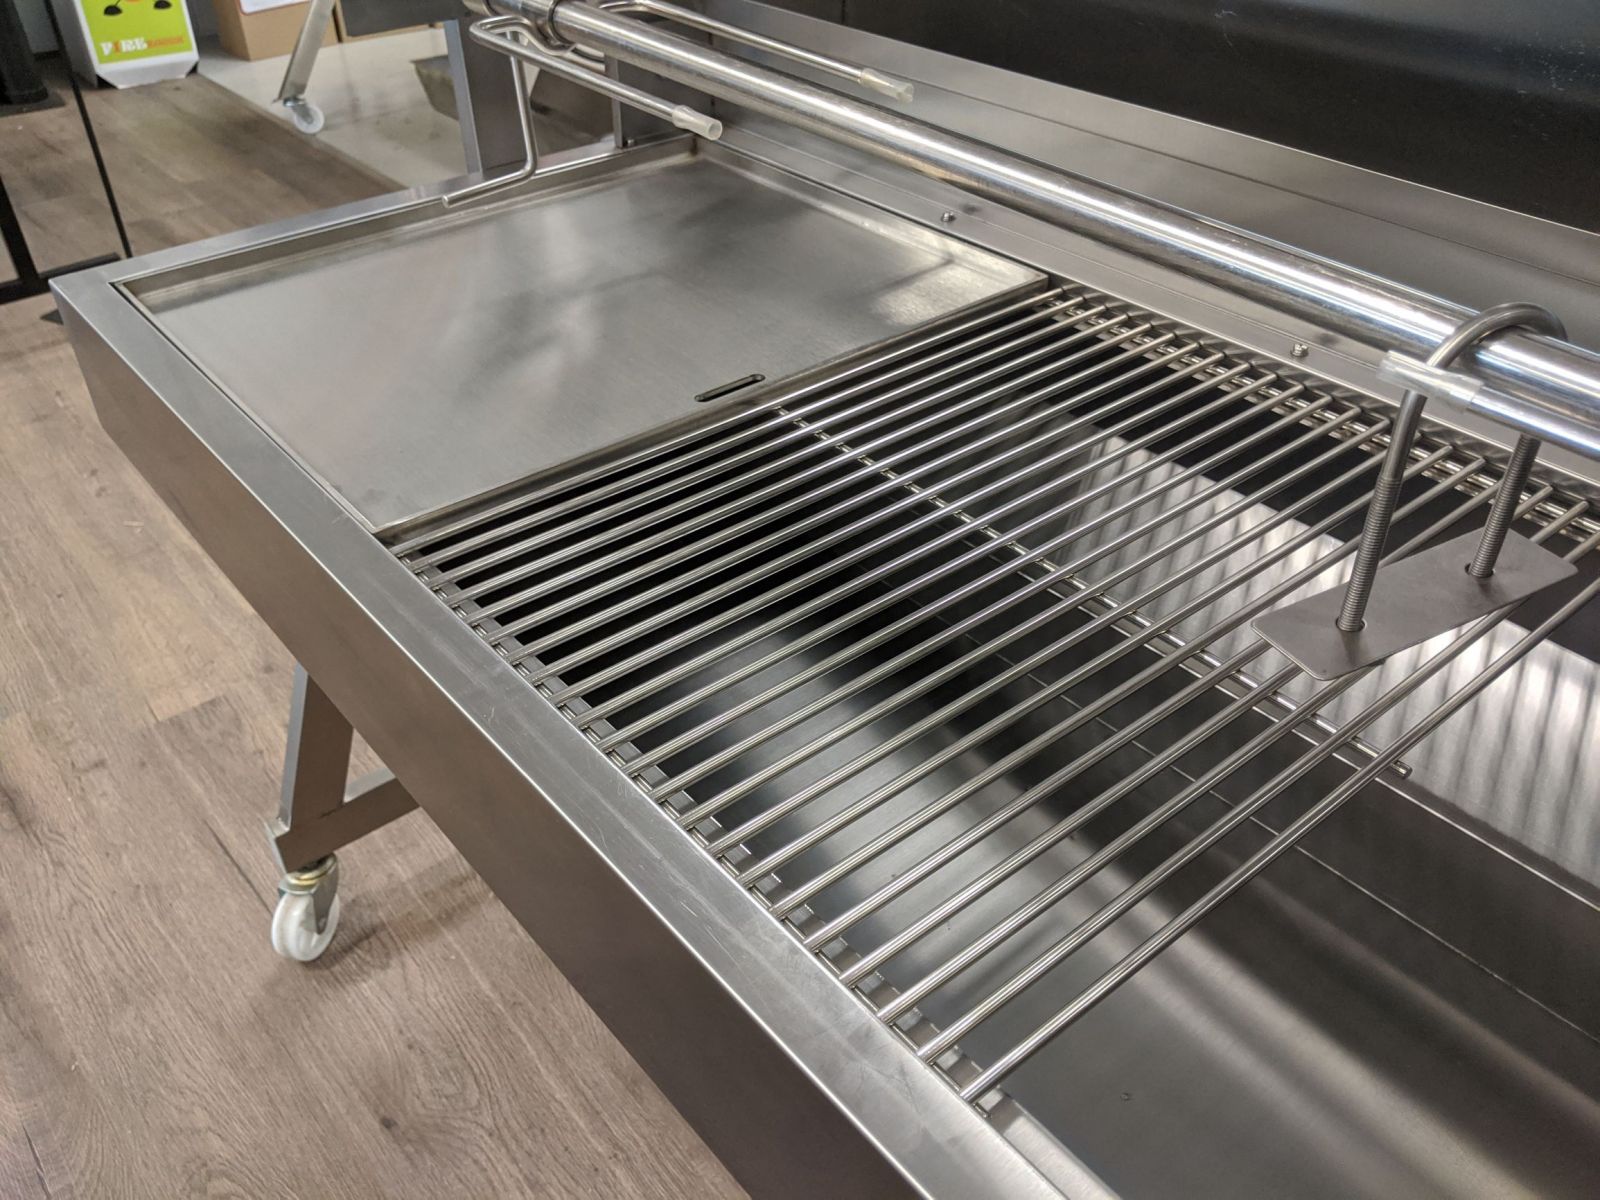 Image of the Stainless Steel BBQ Grill replacing the grill in a BBQ alongside a stainless steel hotplate